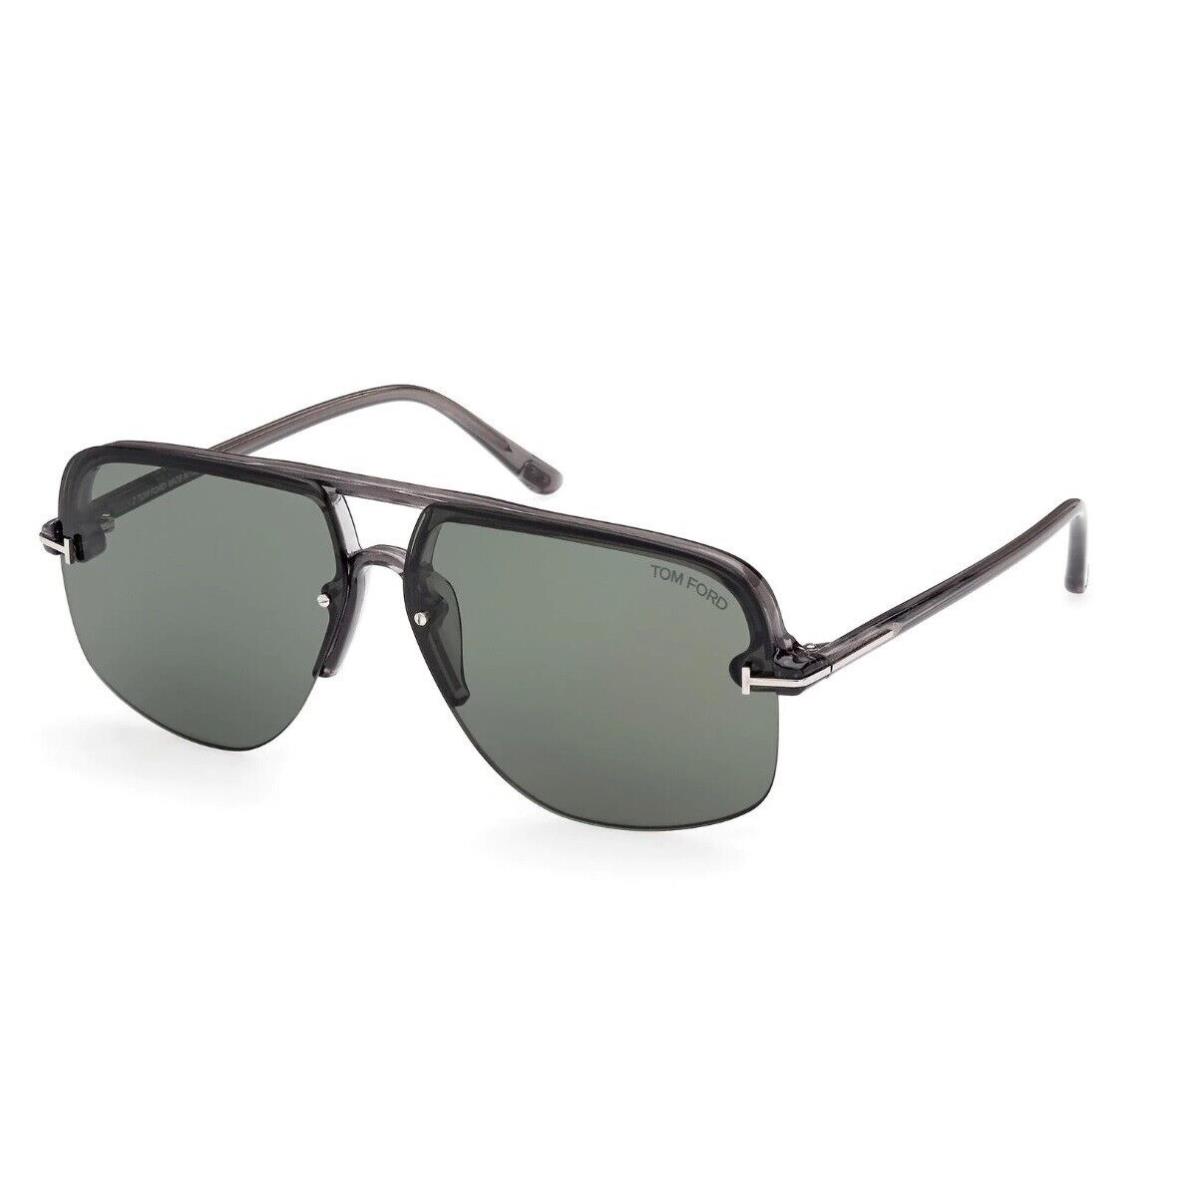 Tom Ford FT1003-20N-63 Grey/other/green